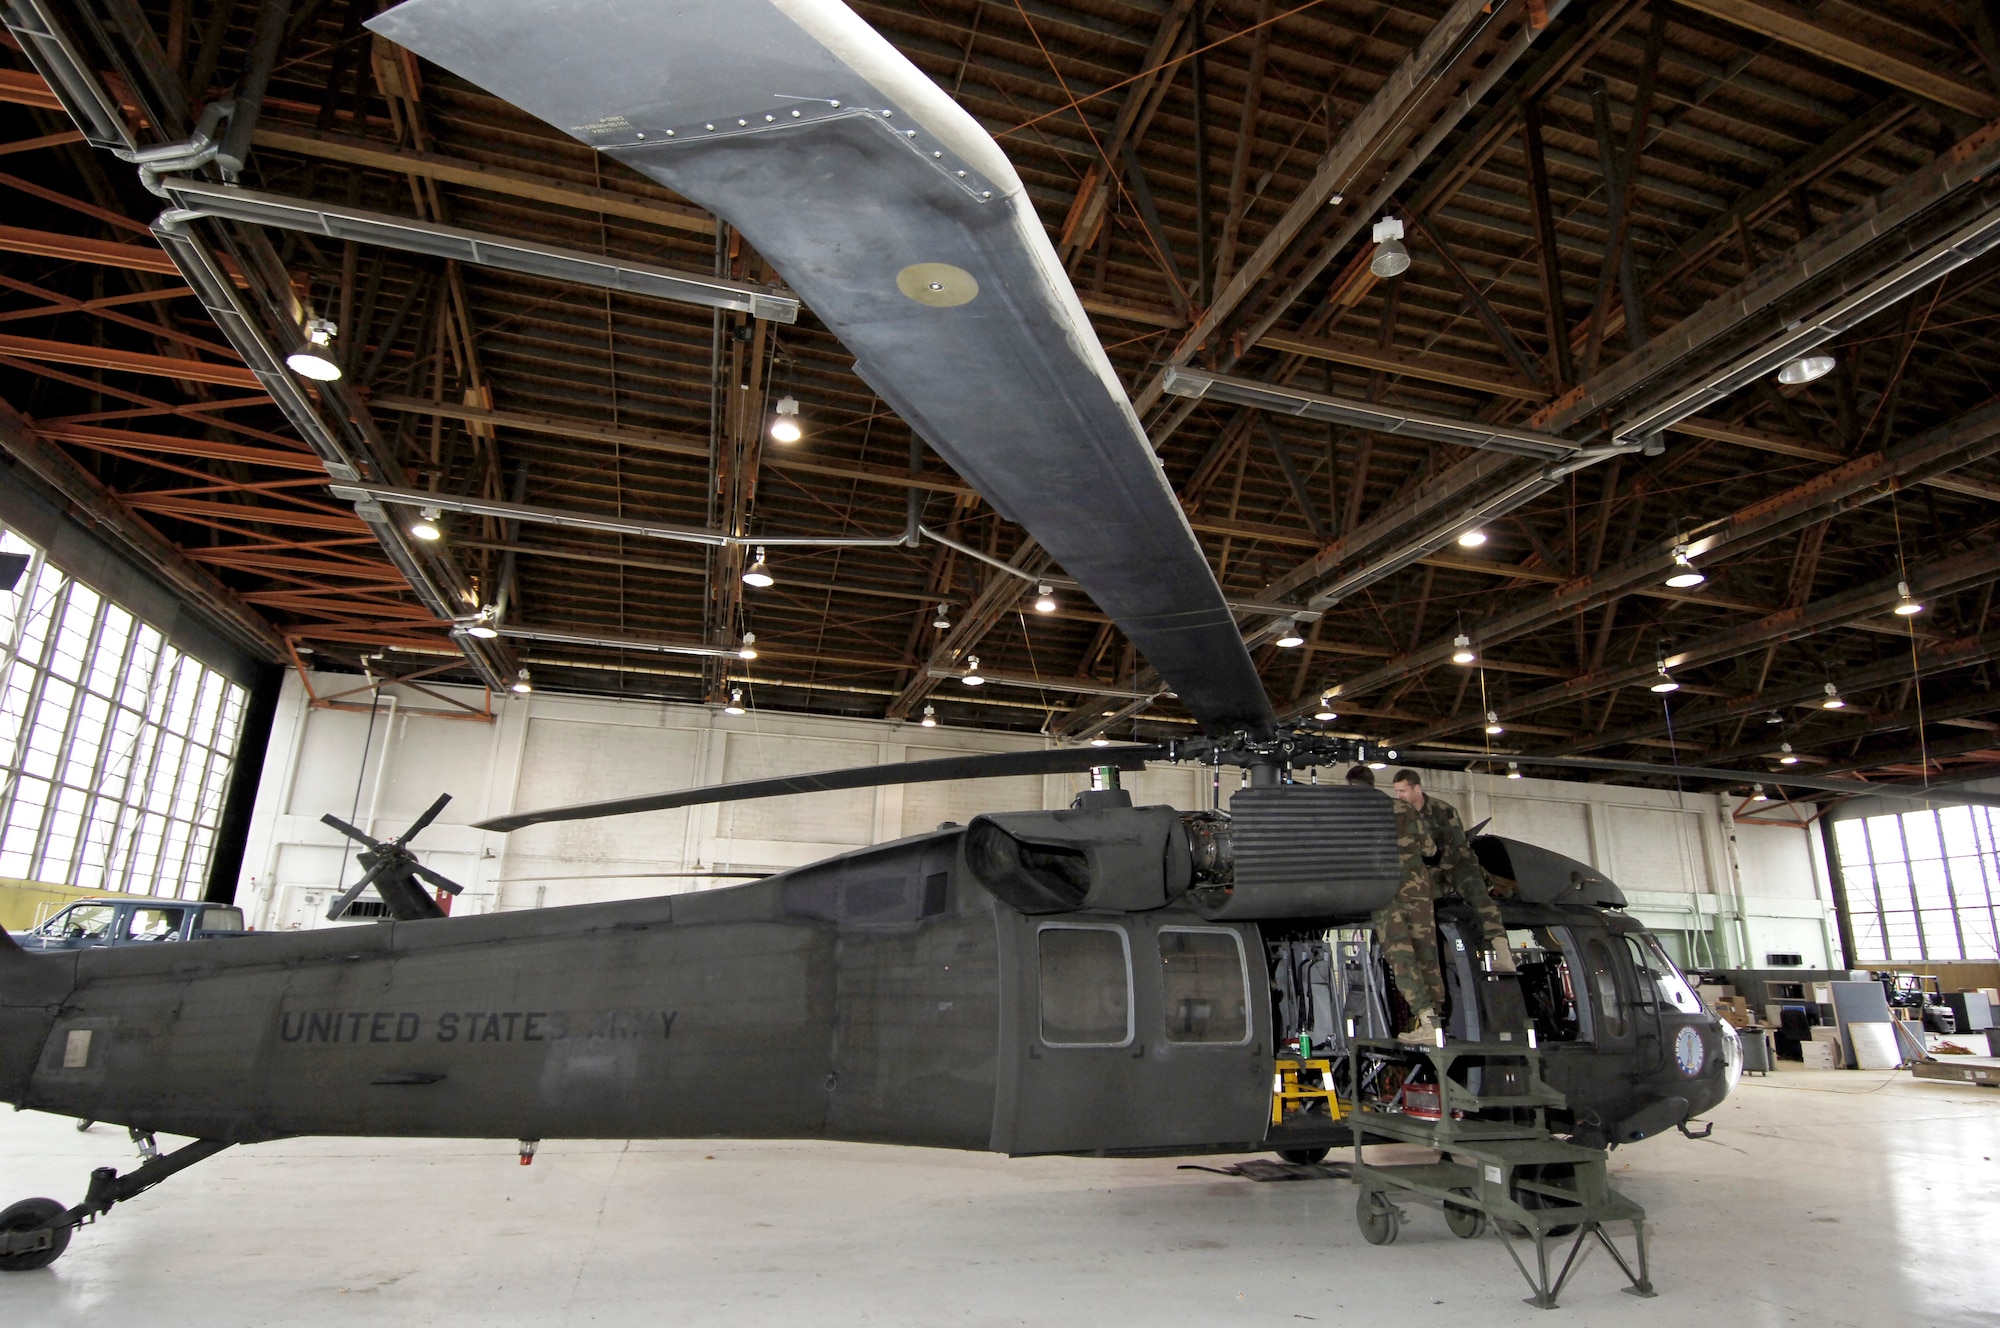 Two members of the Army National Guard's Aviation Support Facility #2 unit install an engine cover on a UH-60A Blackhawk helicopter in preparation for the move. The unit is relocating their helicopters and support equipment from Geiger Air Field to Fairchild's Hangar 1001.